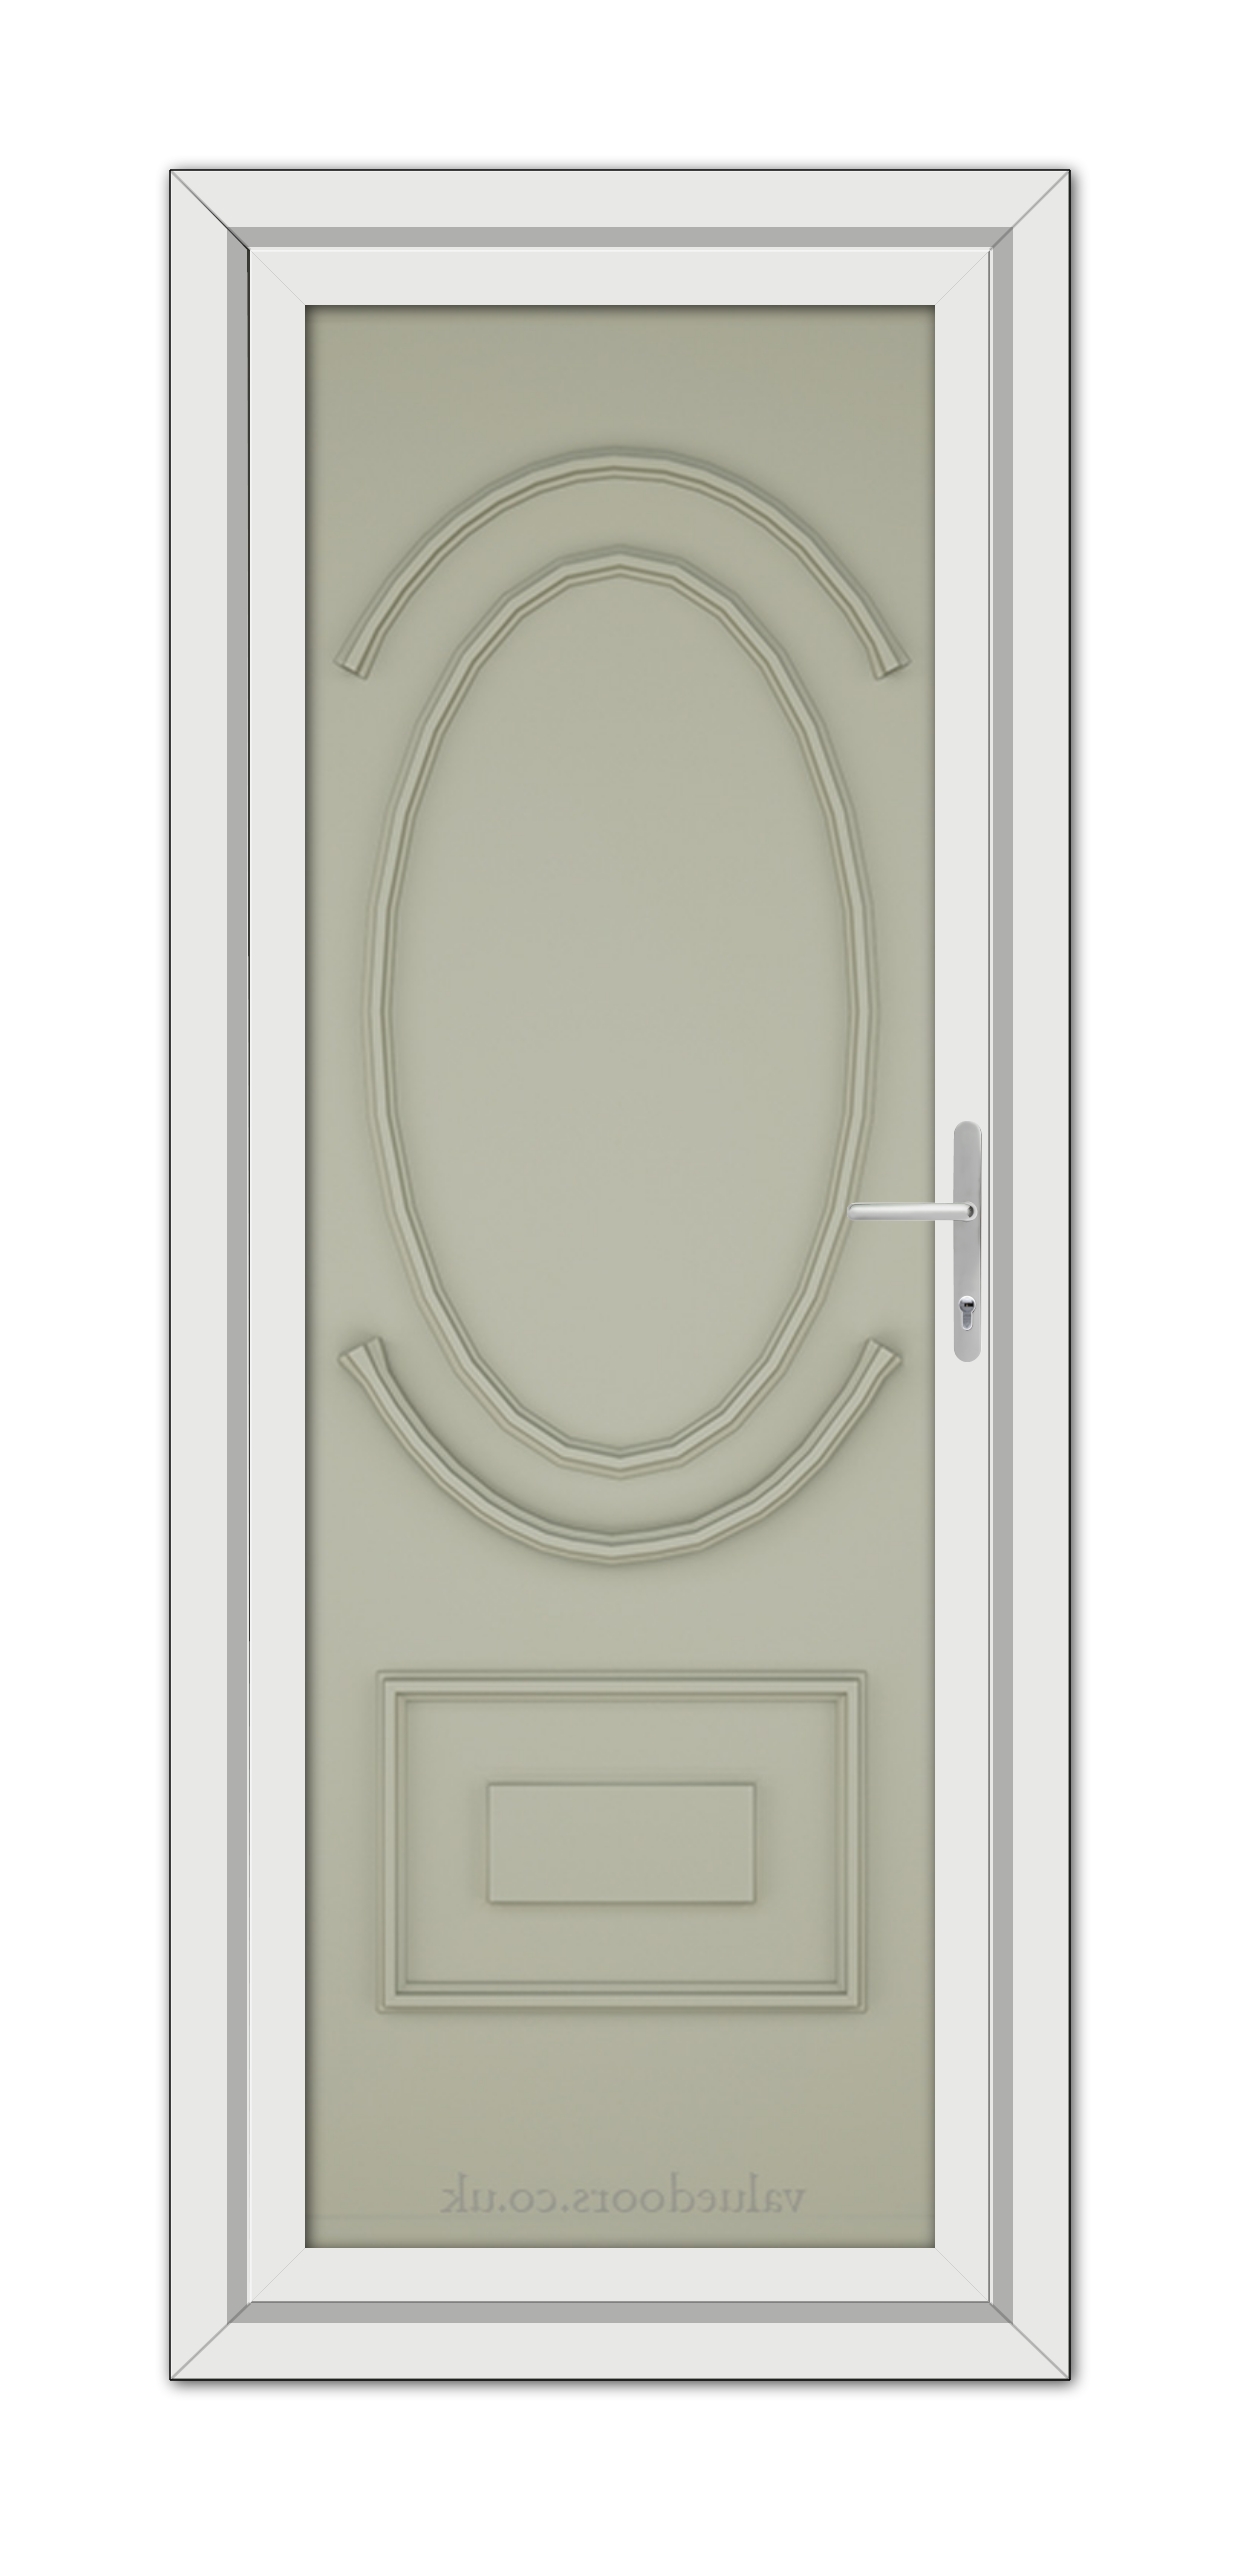 Agate Grey Richmond Solid uPVC Door with an oval glass window and a rectangular panel at the bottom, set within a white frame.